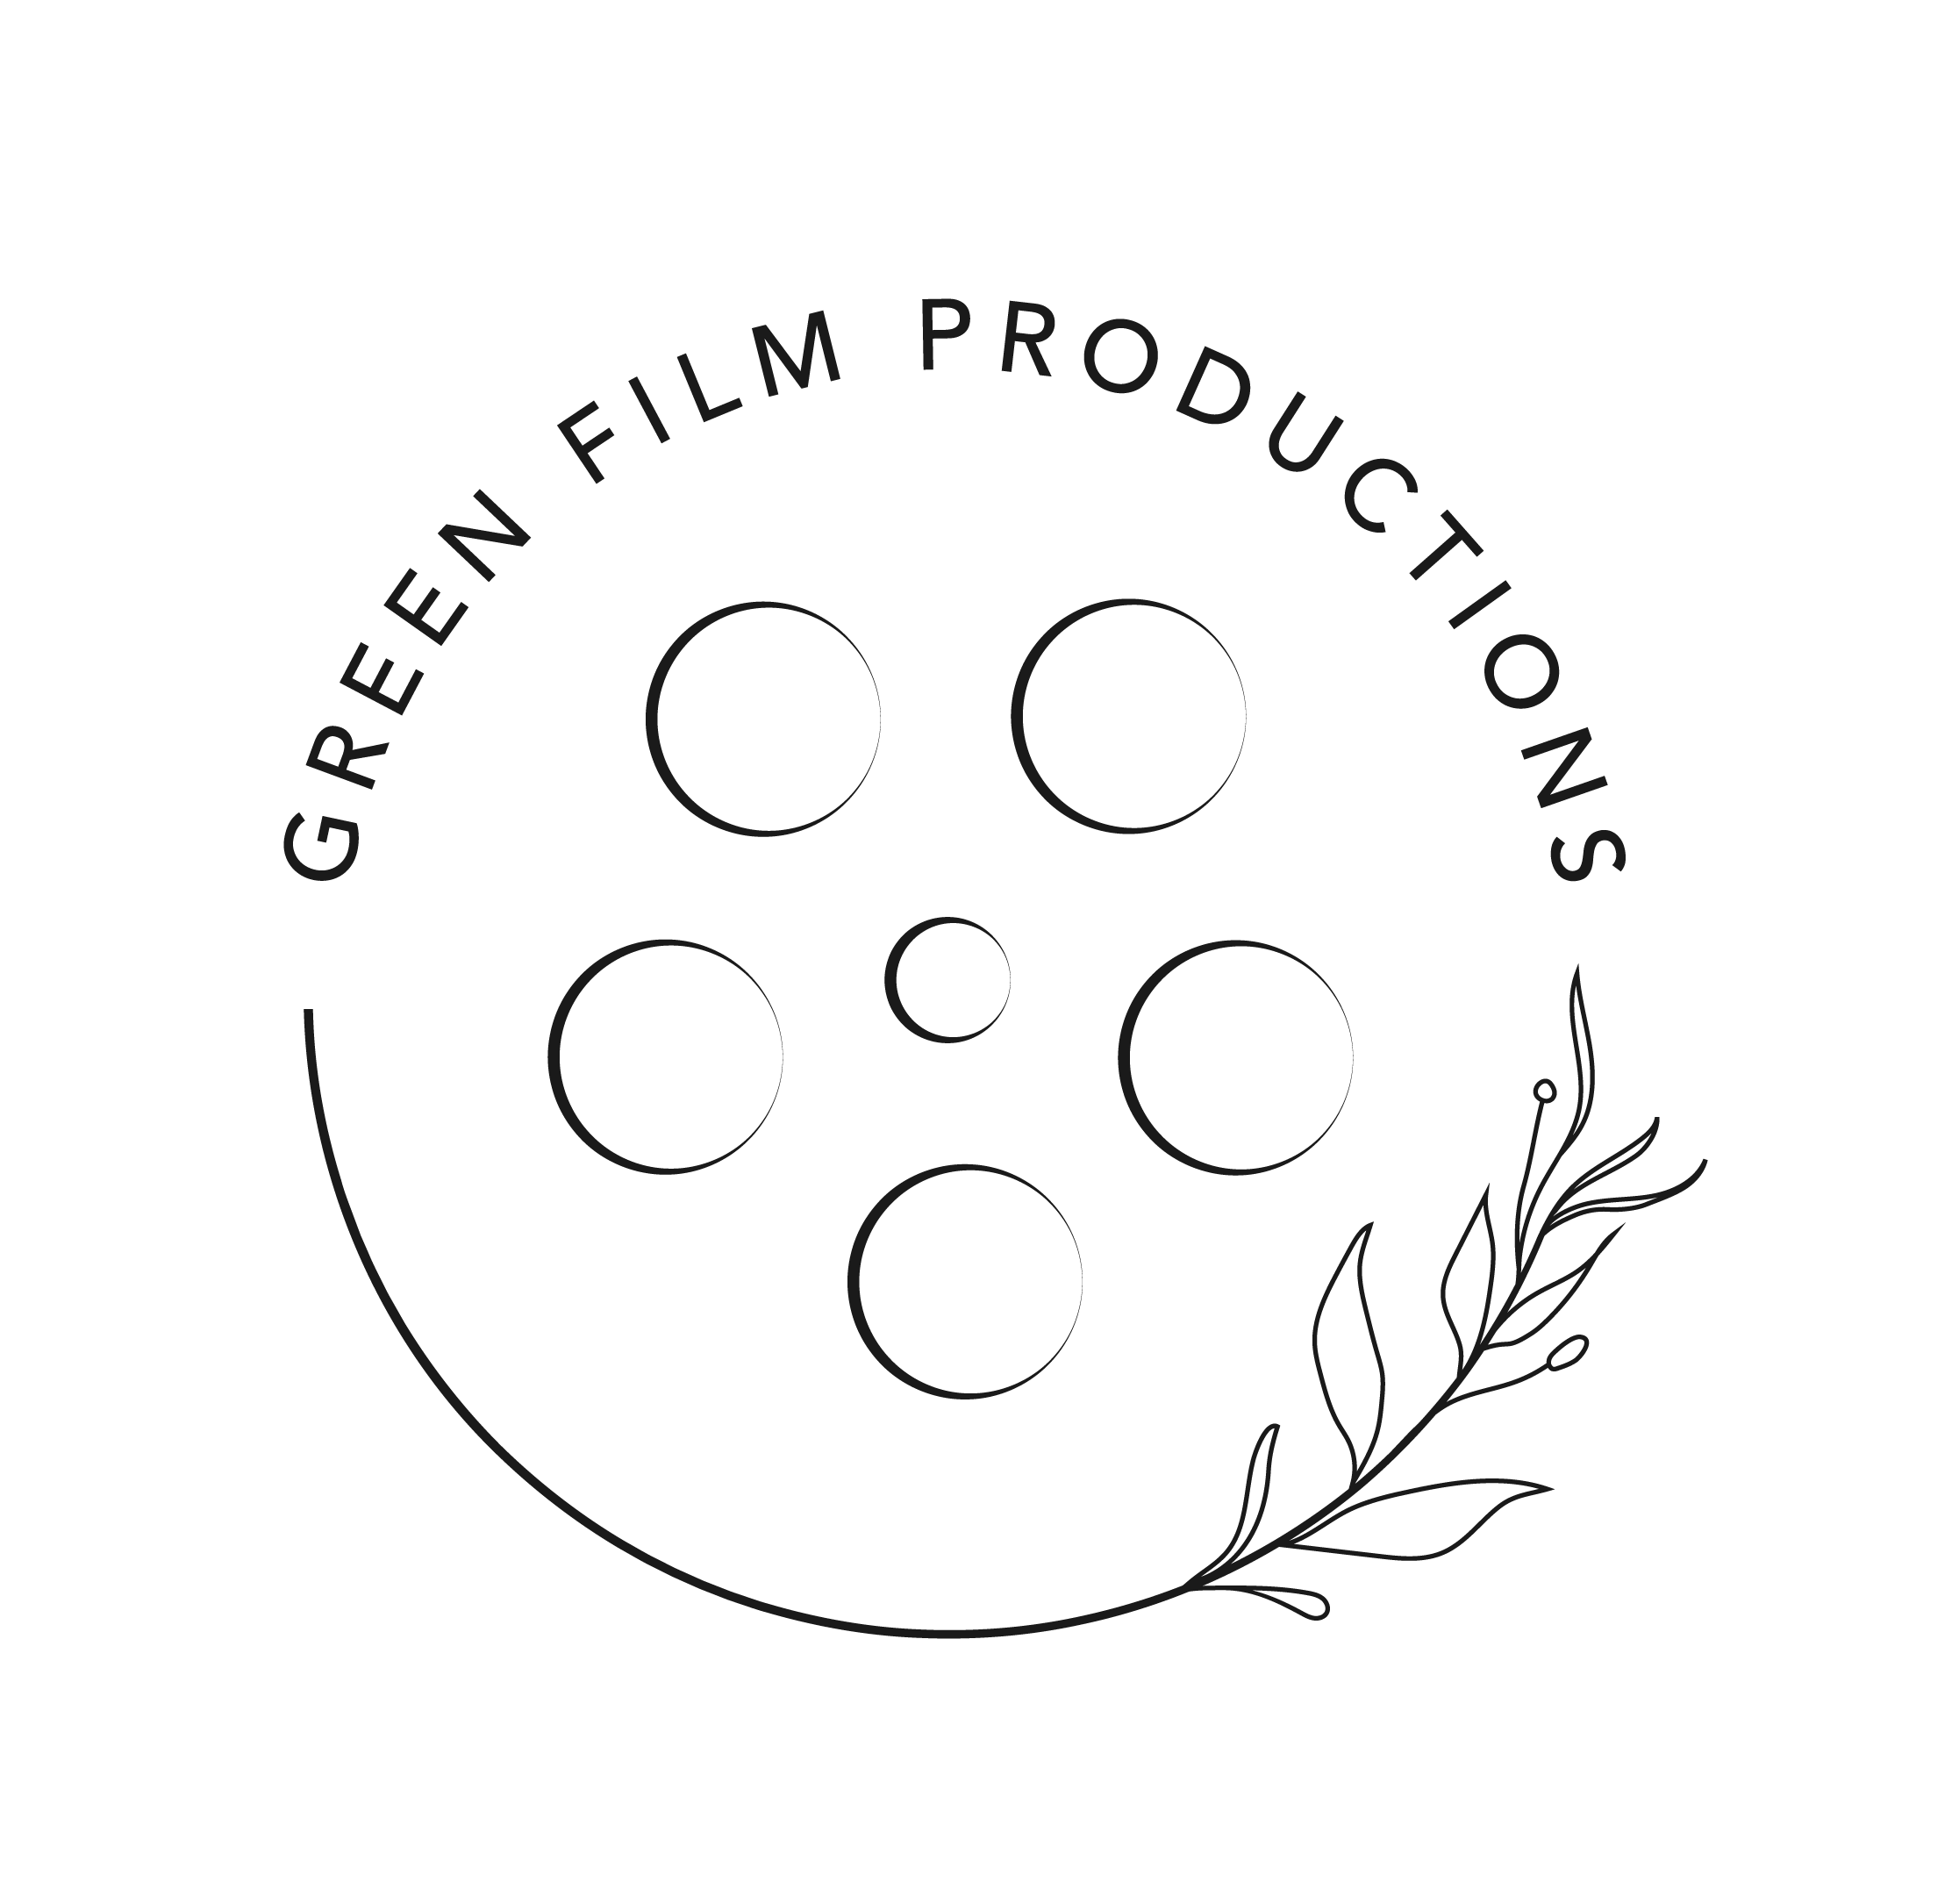 Green Film Productions